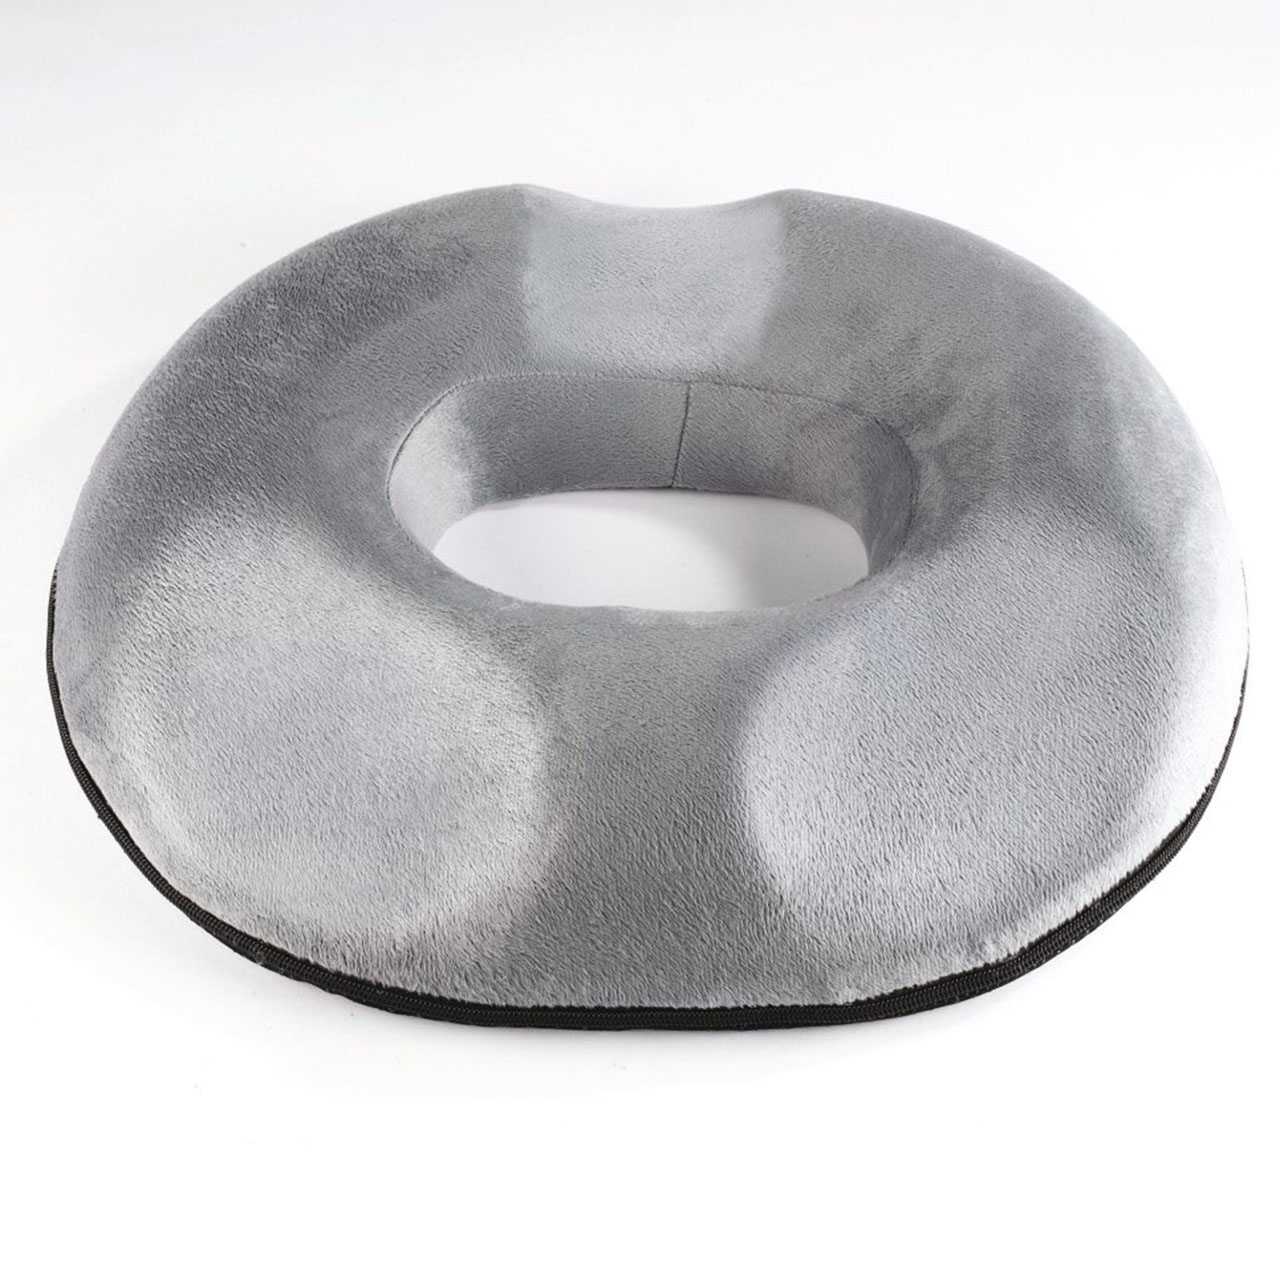 Oval Donut Pressure Relief Cushion